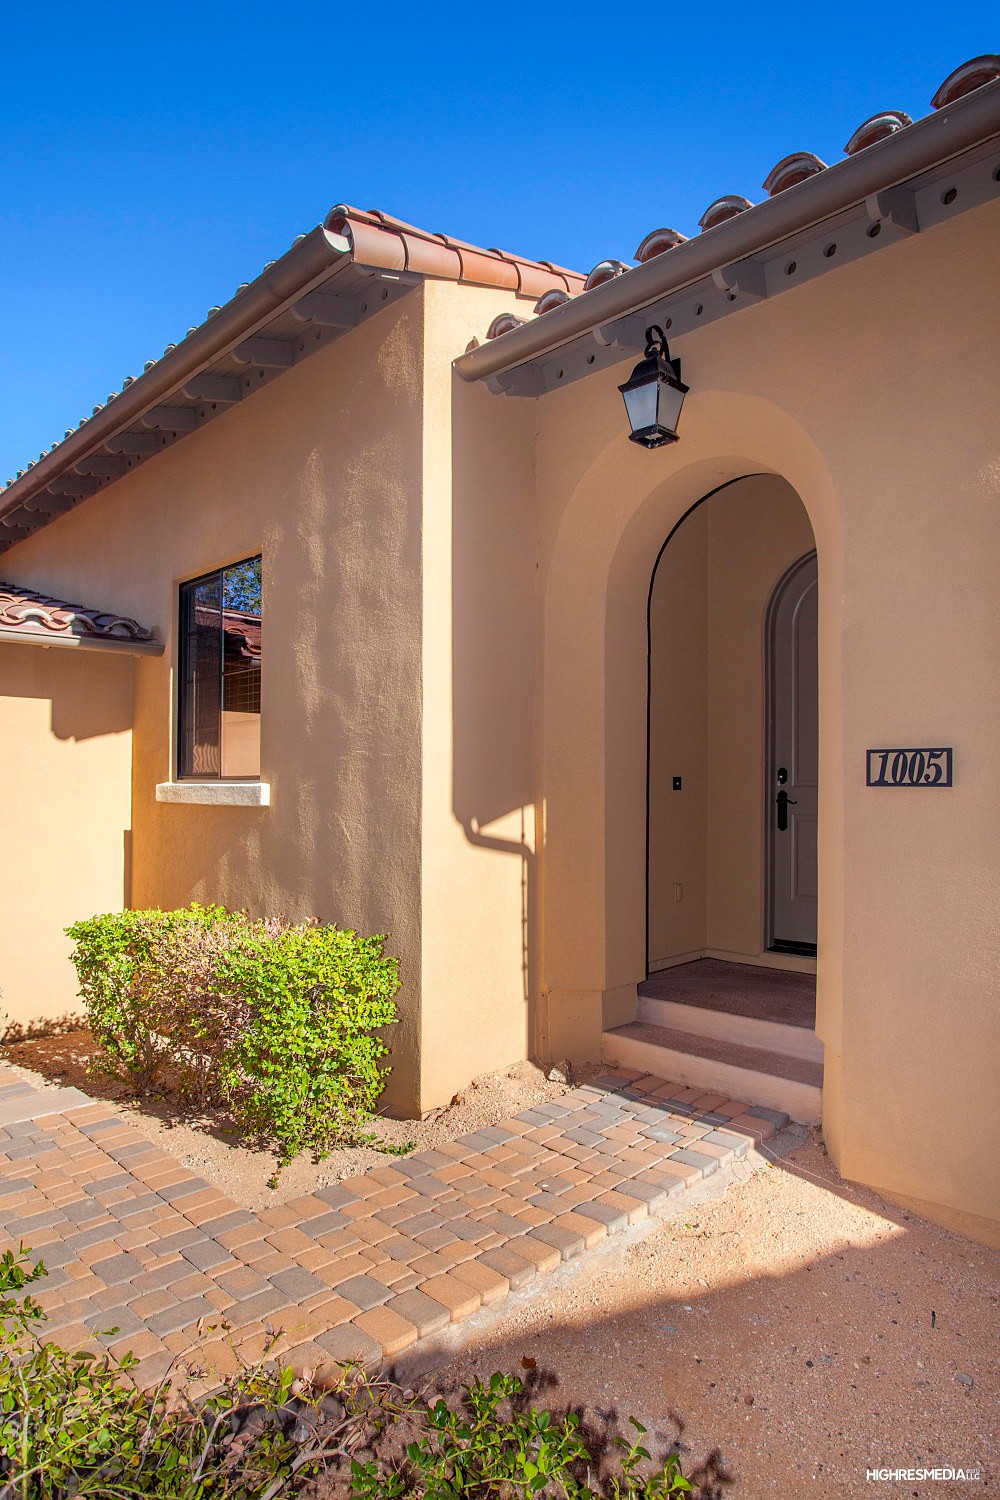 Front entry at this Scottsdale townhome for sale in Market Street at DC Ranch located at 20704 N 90th Pl #1005 Scottsdale, AZ 85255 listed by Don Matheson at The Matheson Team